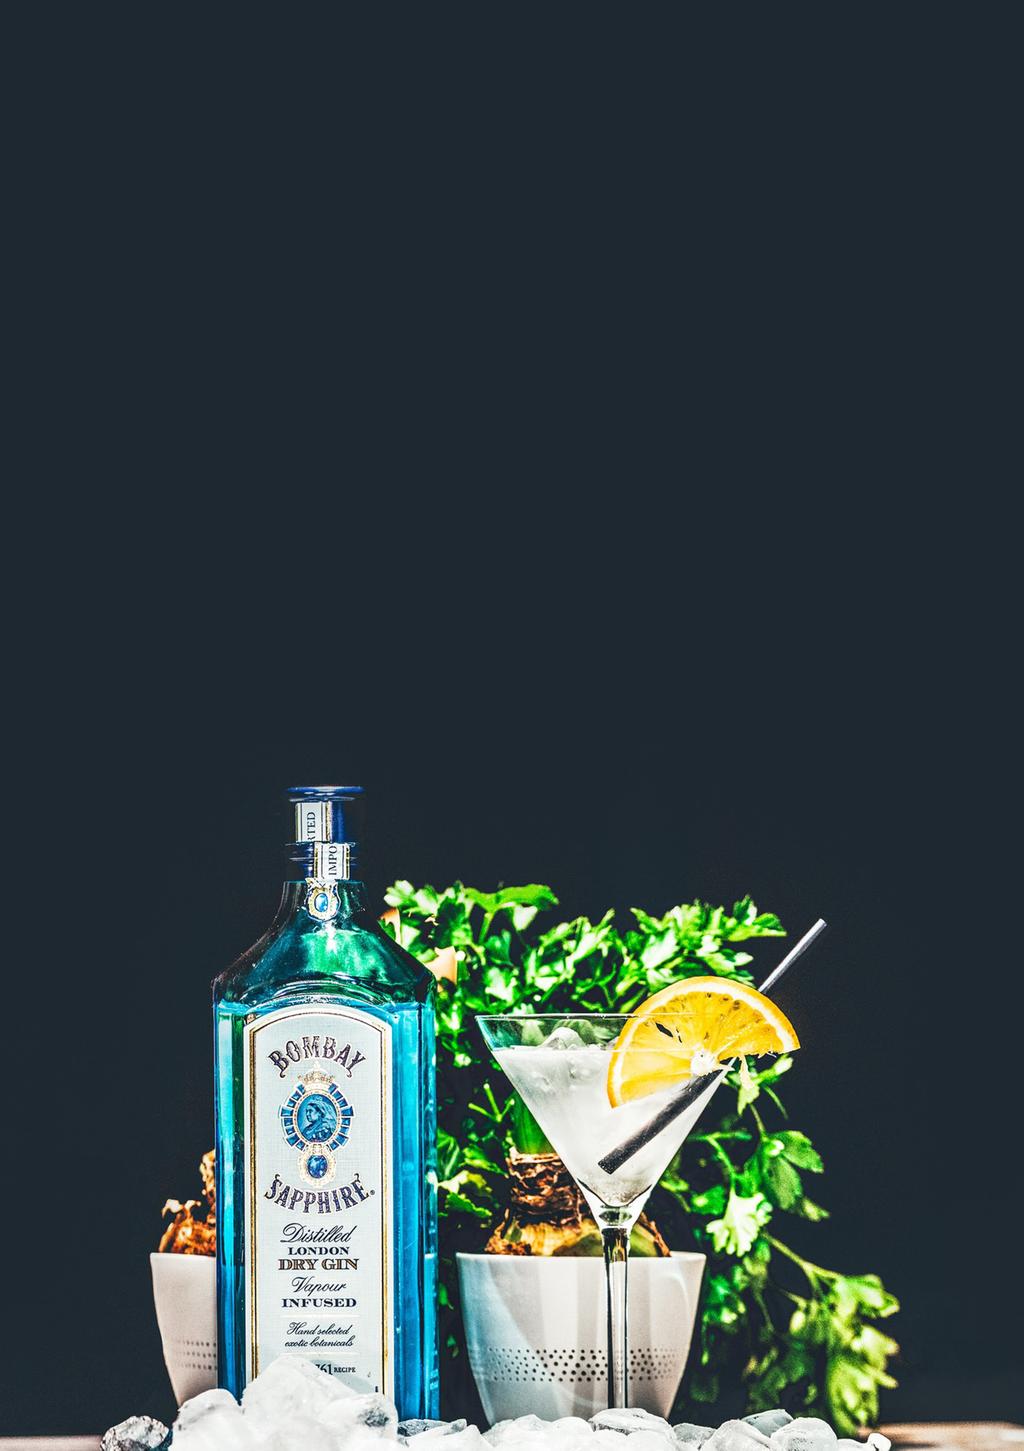 GIN ( 0,04L) BEEFEATER 3,50 BOMBAY SAPPHIRE